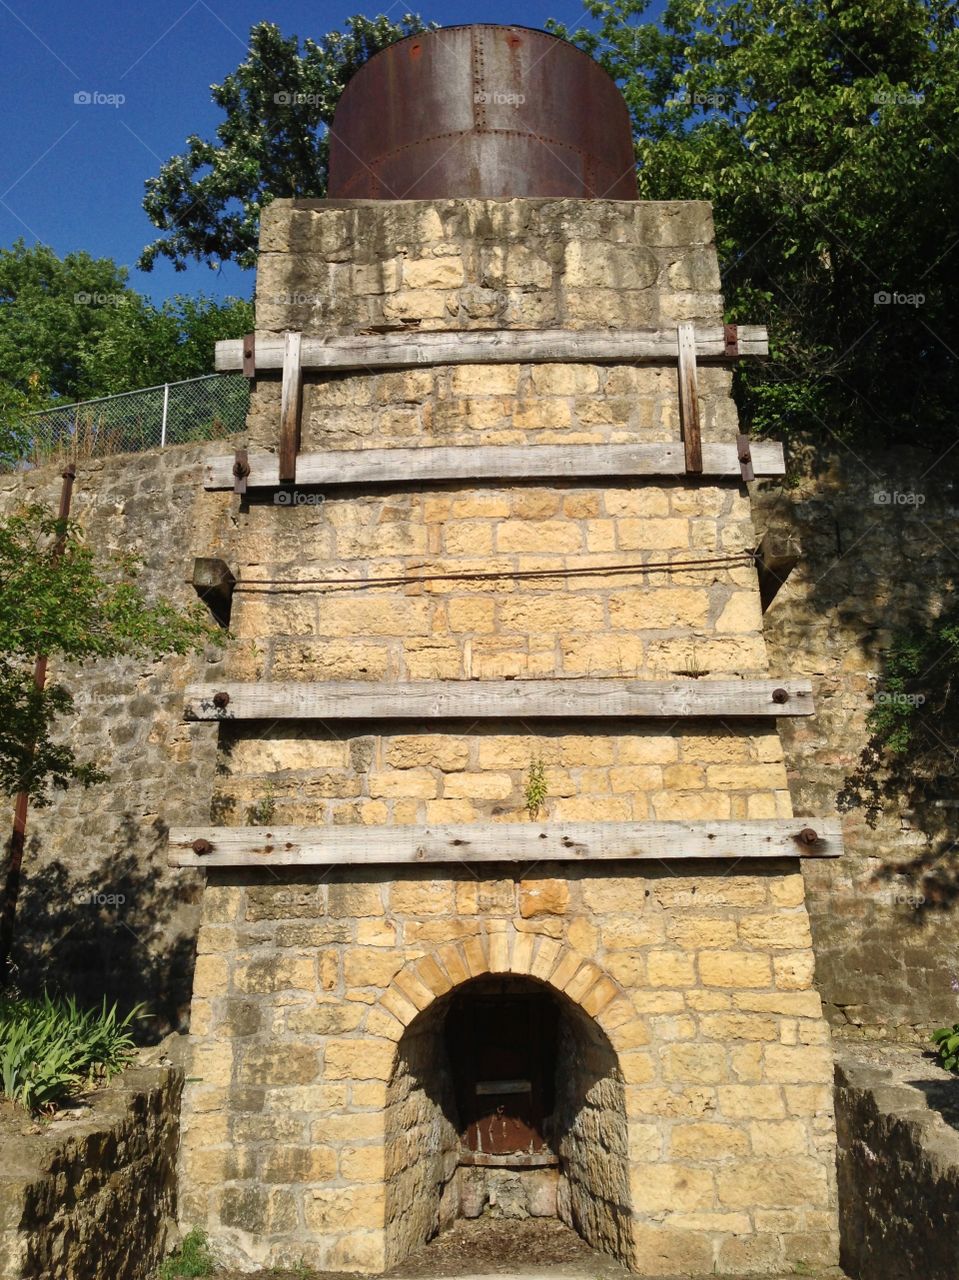 Hurstville Lime Kilns - Iowa - Posted to the National Register of Historic Places